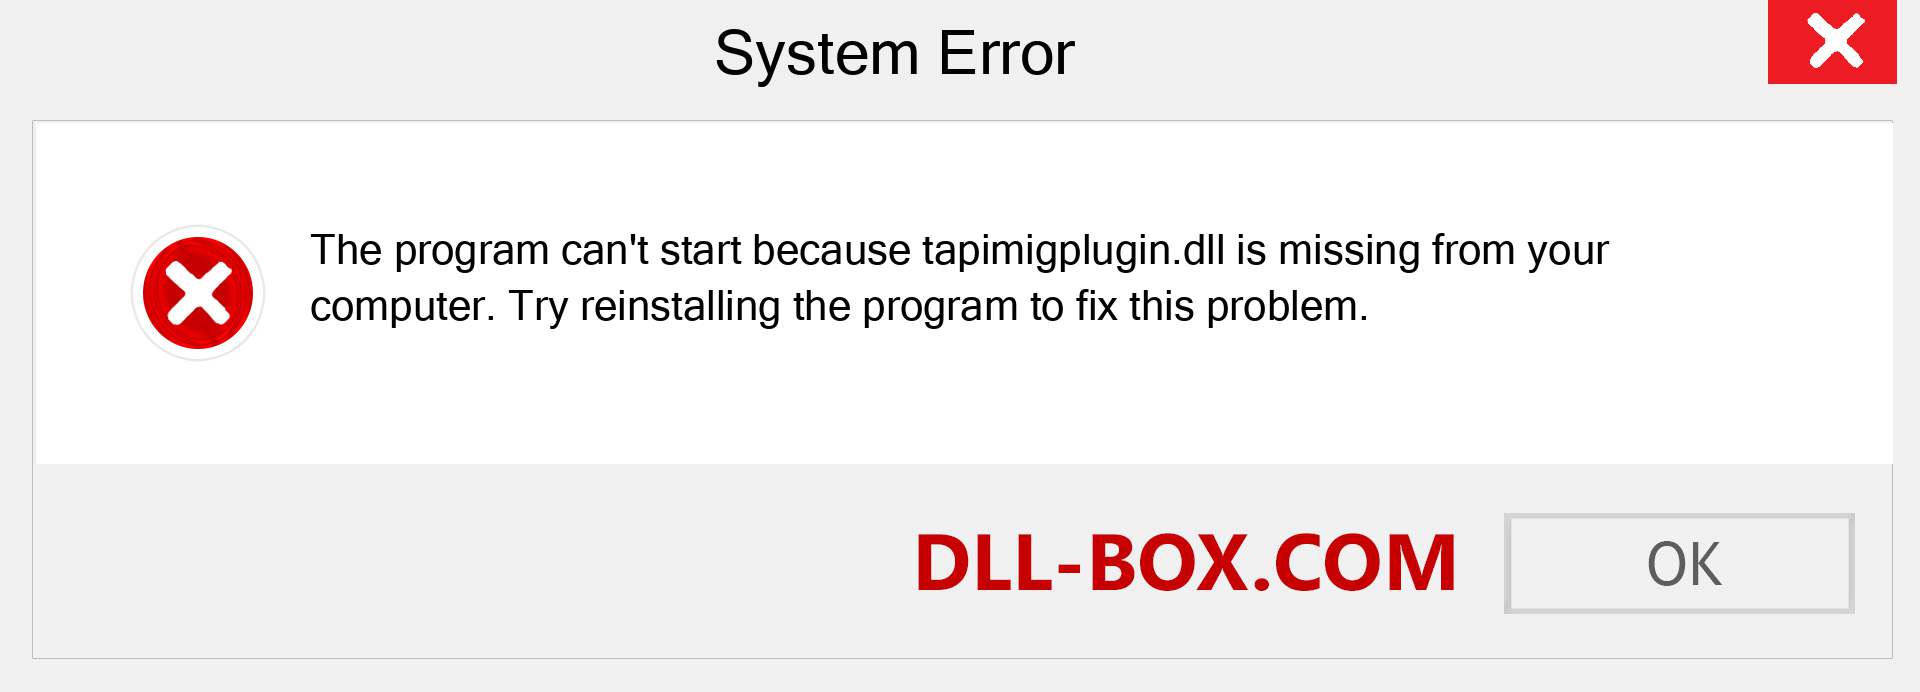  tapimigplugin.dll file is missing?. Download for Windows 7, 8, 10 - Fix  tapimigplugin dll Missing Error on Windows, photos, images